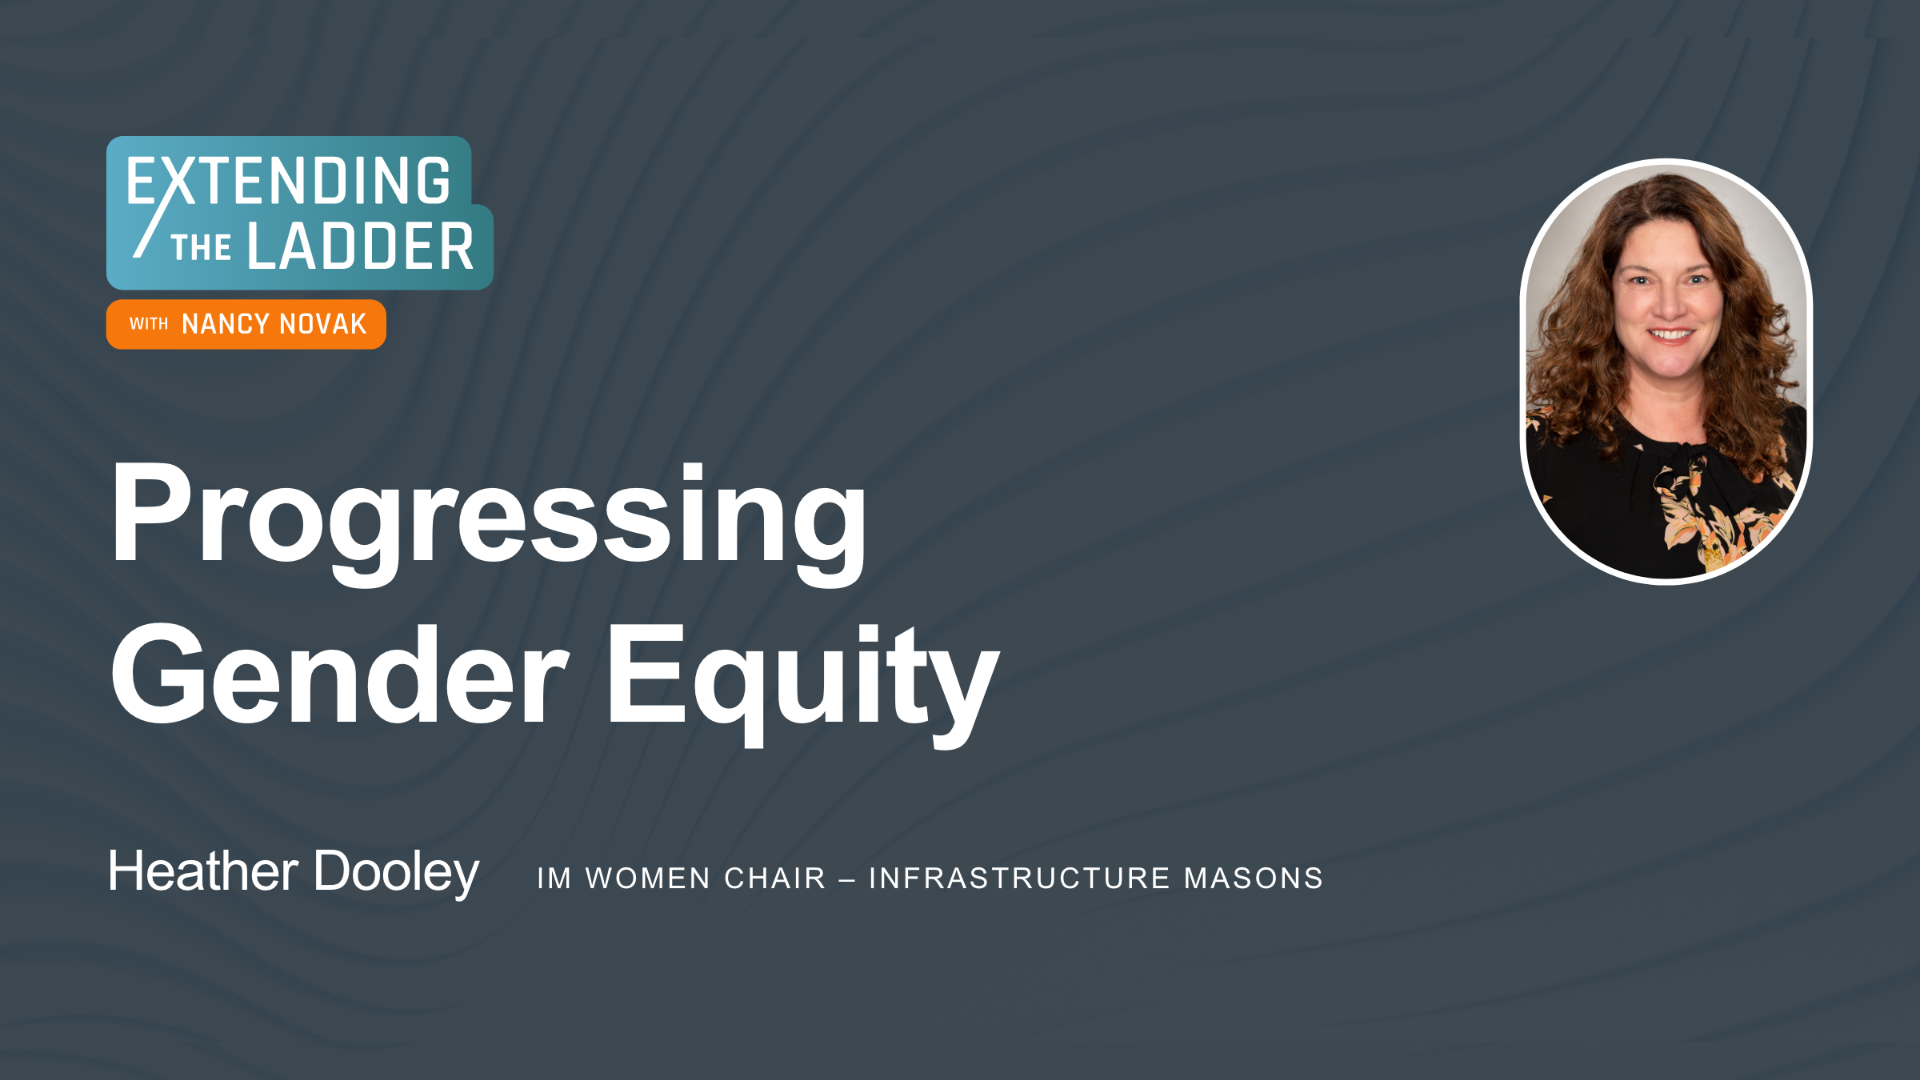 Featured image: gender equity in the workplace with Heather Dooley.